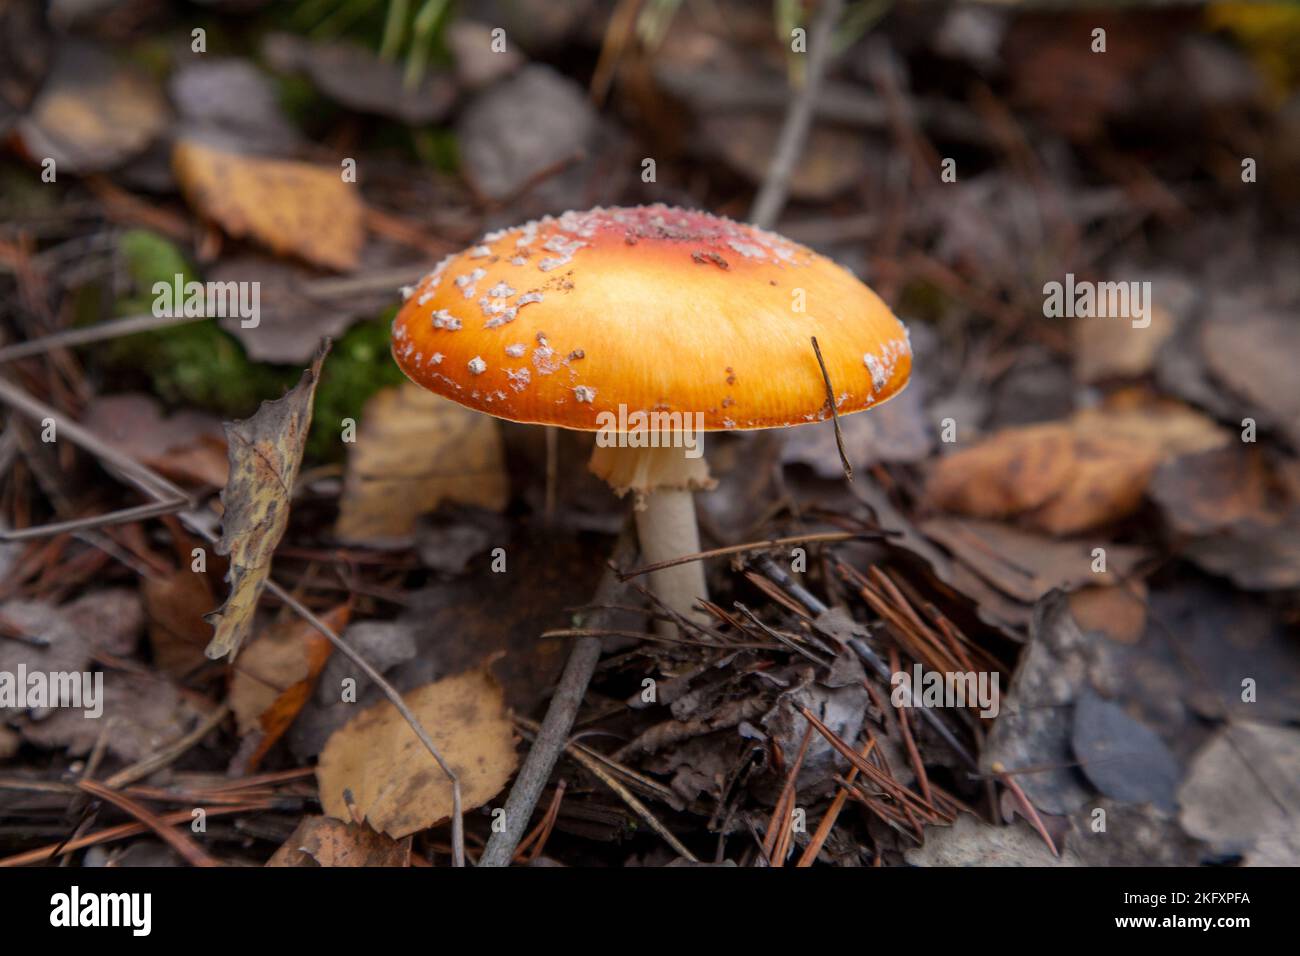 Wild Fly Agaric with red cup mushroom is beautiful mushroom but very toxic. The Fly Agaric or Fly Amanita (Amanita Muscaria) is now primarily famed fo Stock Photo